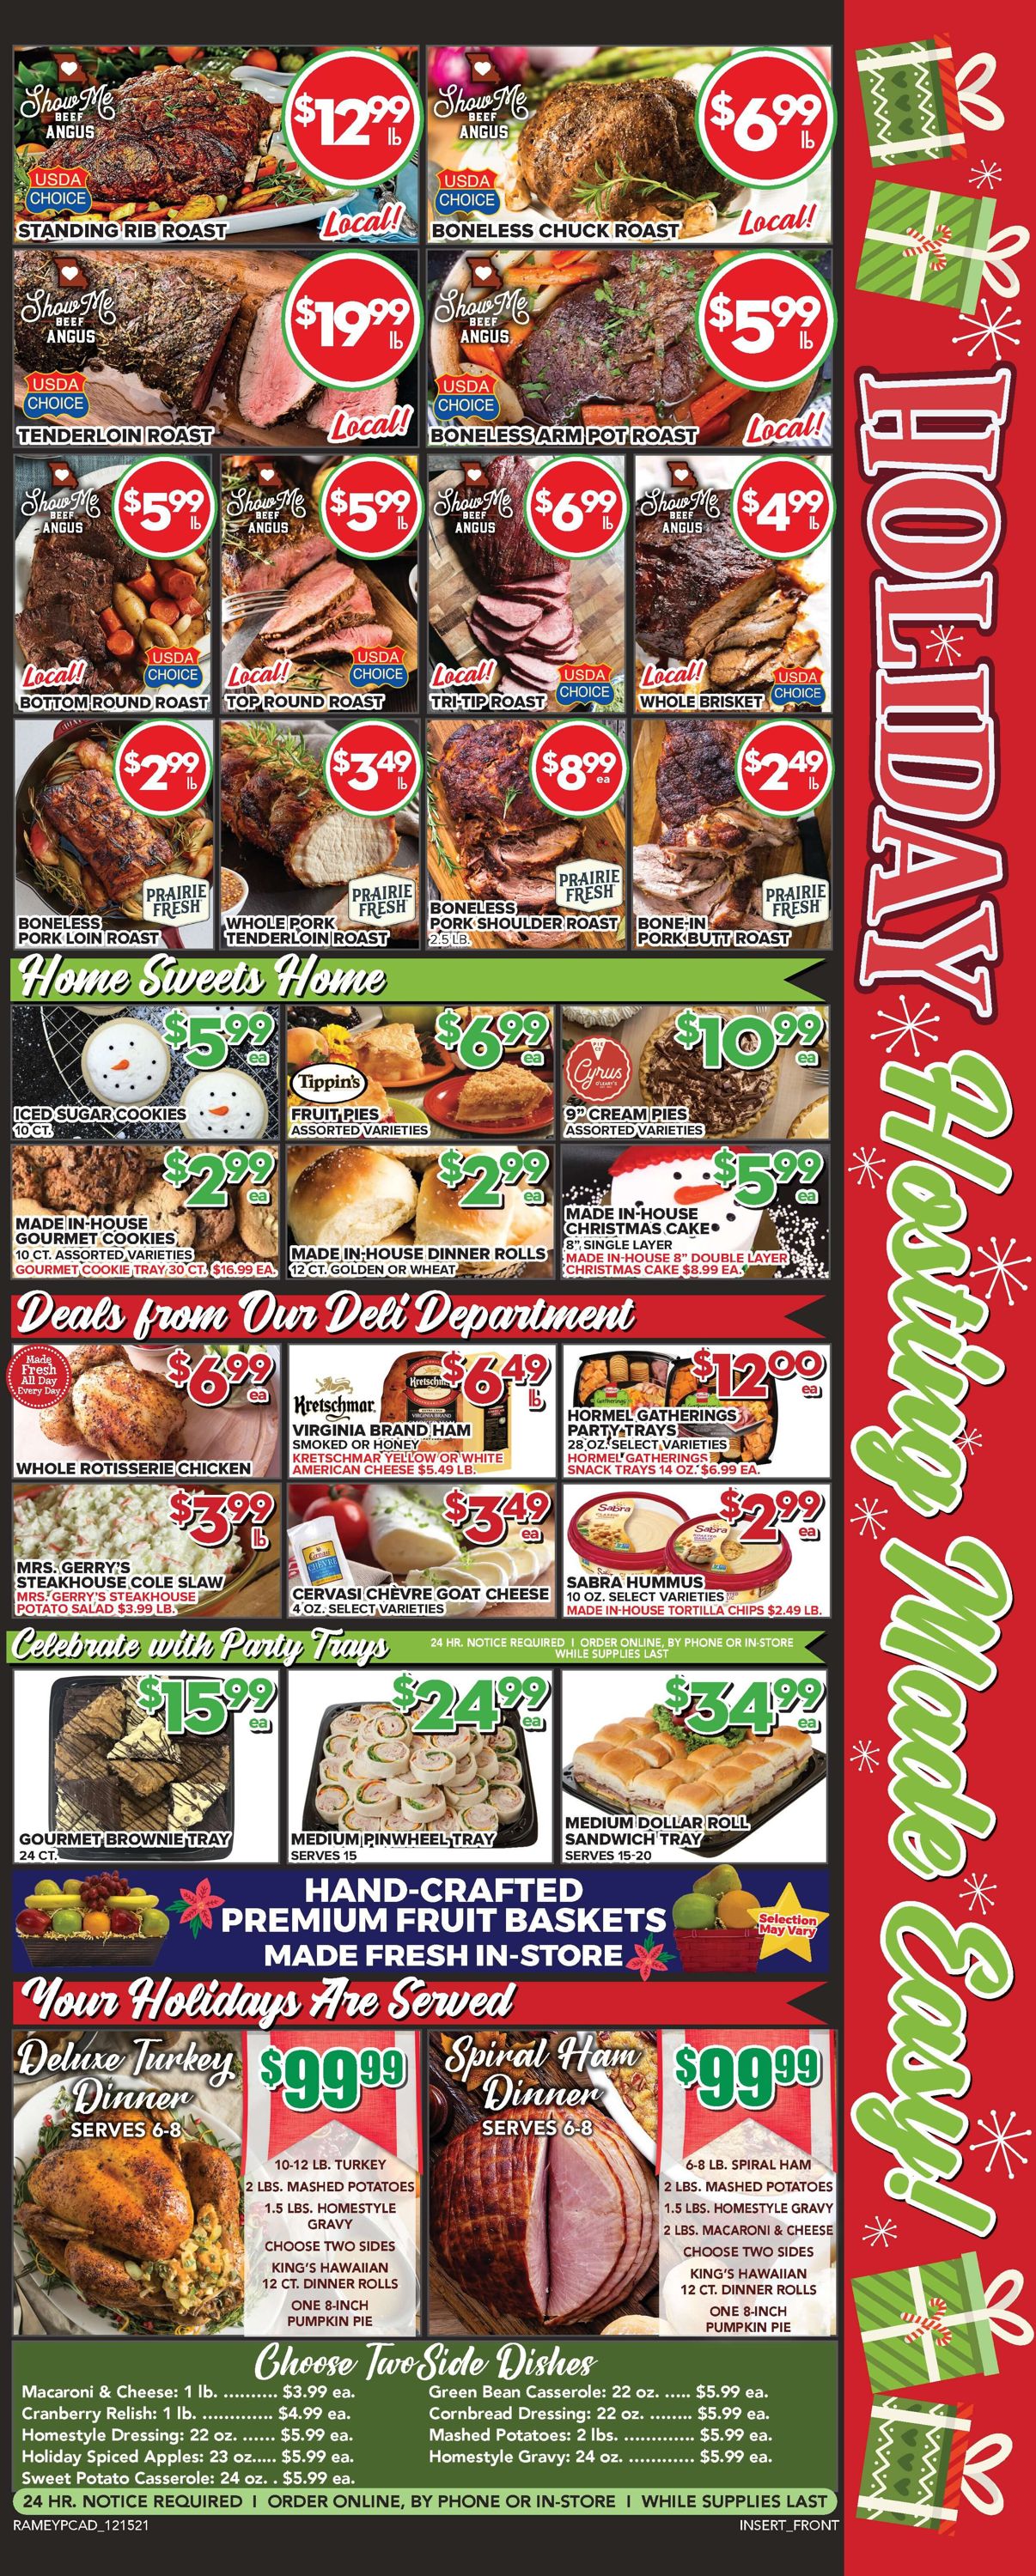 Price Cutter CHRISTMAS 2021 Weekly Ad Circular - valid 12/15-12/25/2021 (Page 5)